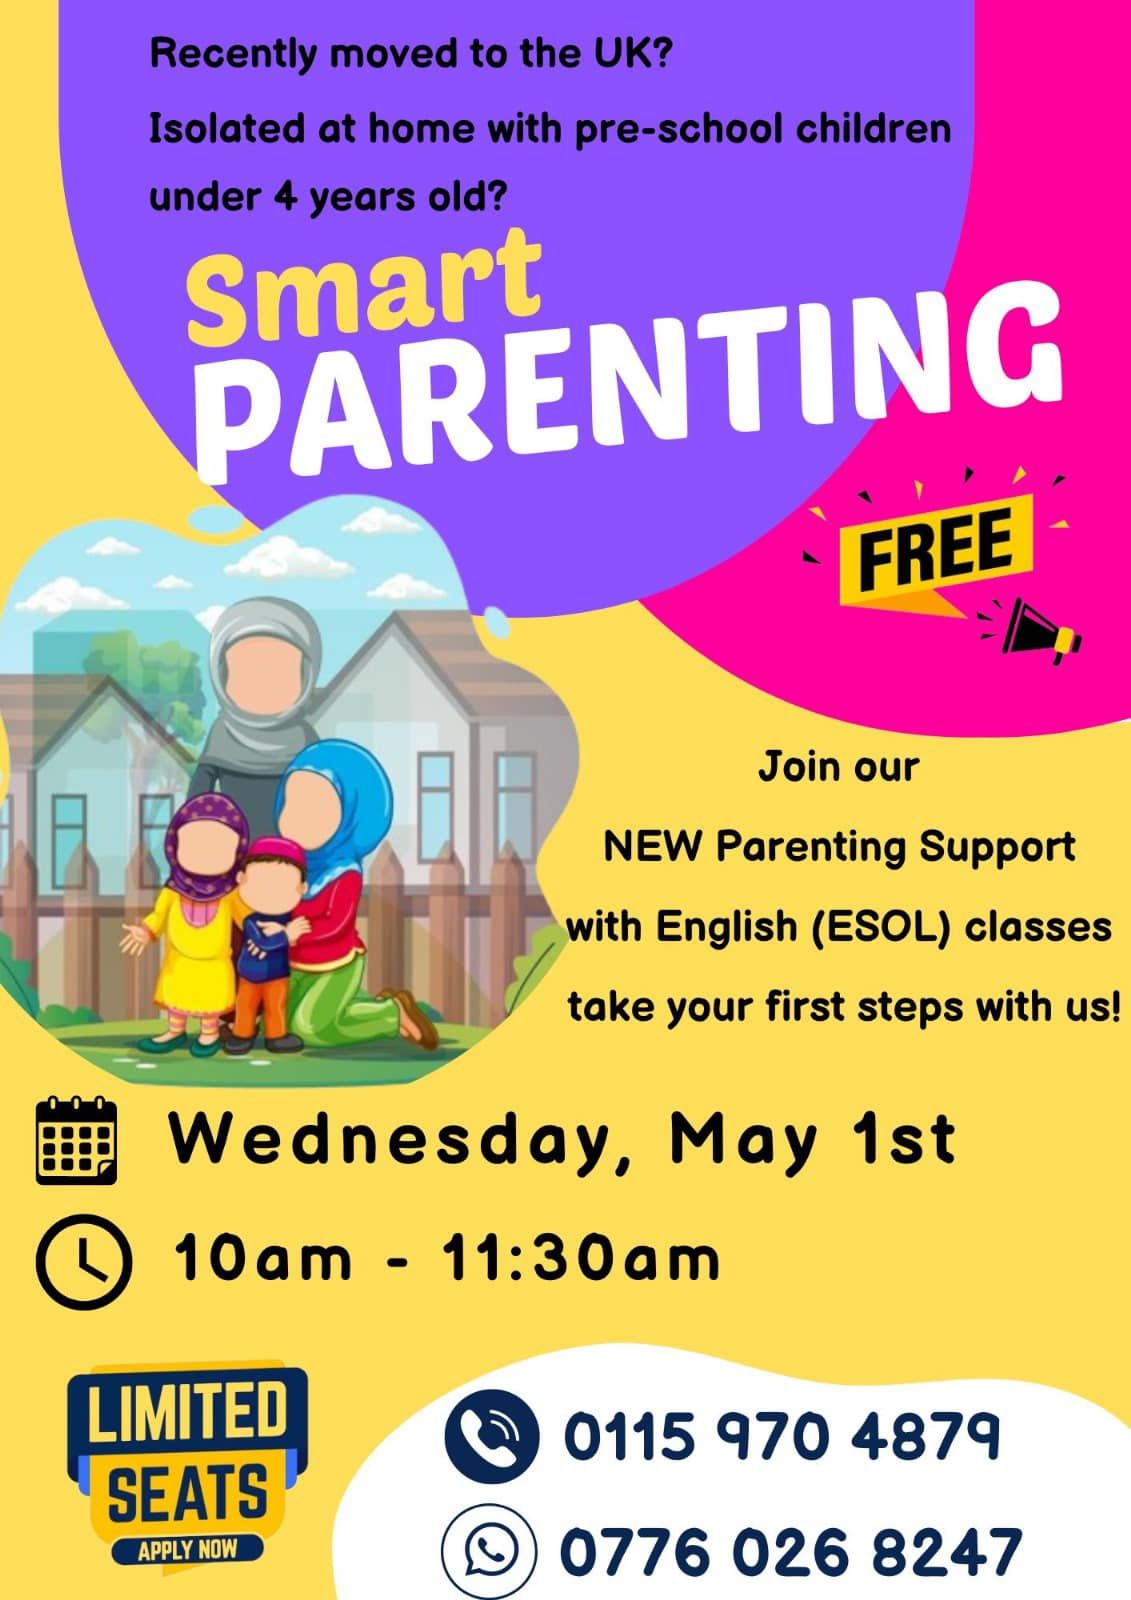 Parenting Support with ESOL